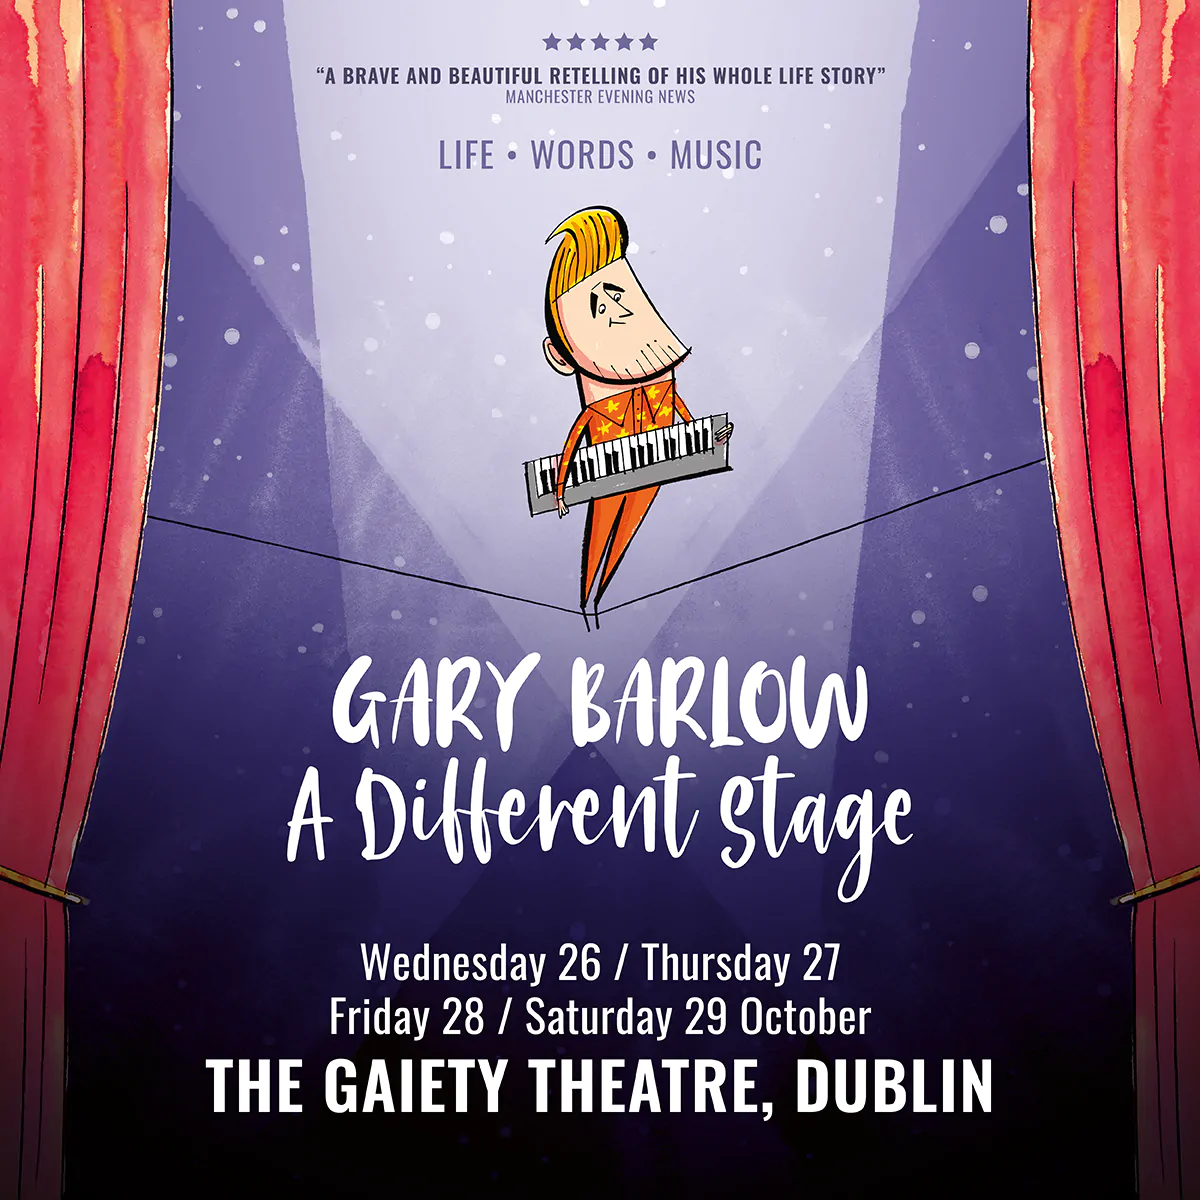 GARY BARLOW announces ‘A Different Stage’ shows at Dublin’s Gaiety Theatre from 26th – 29th October 2022